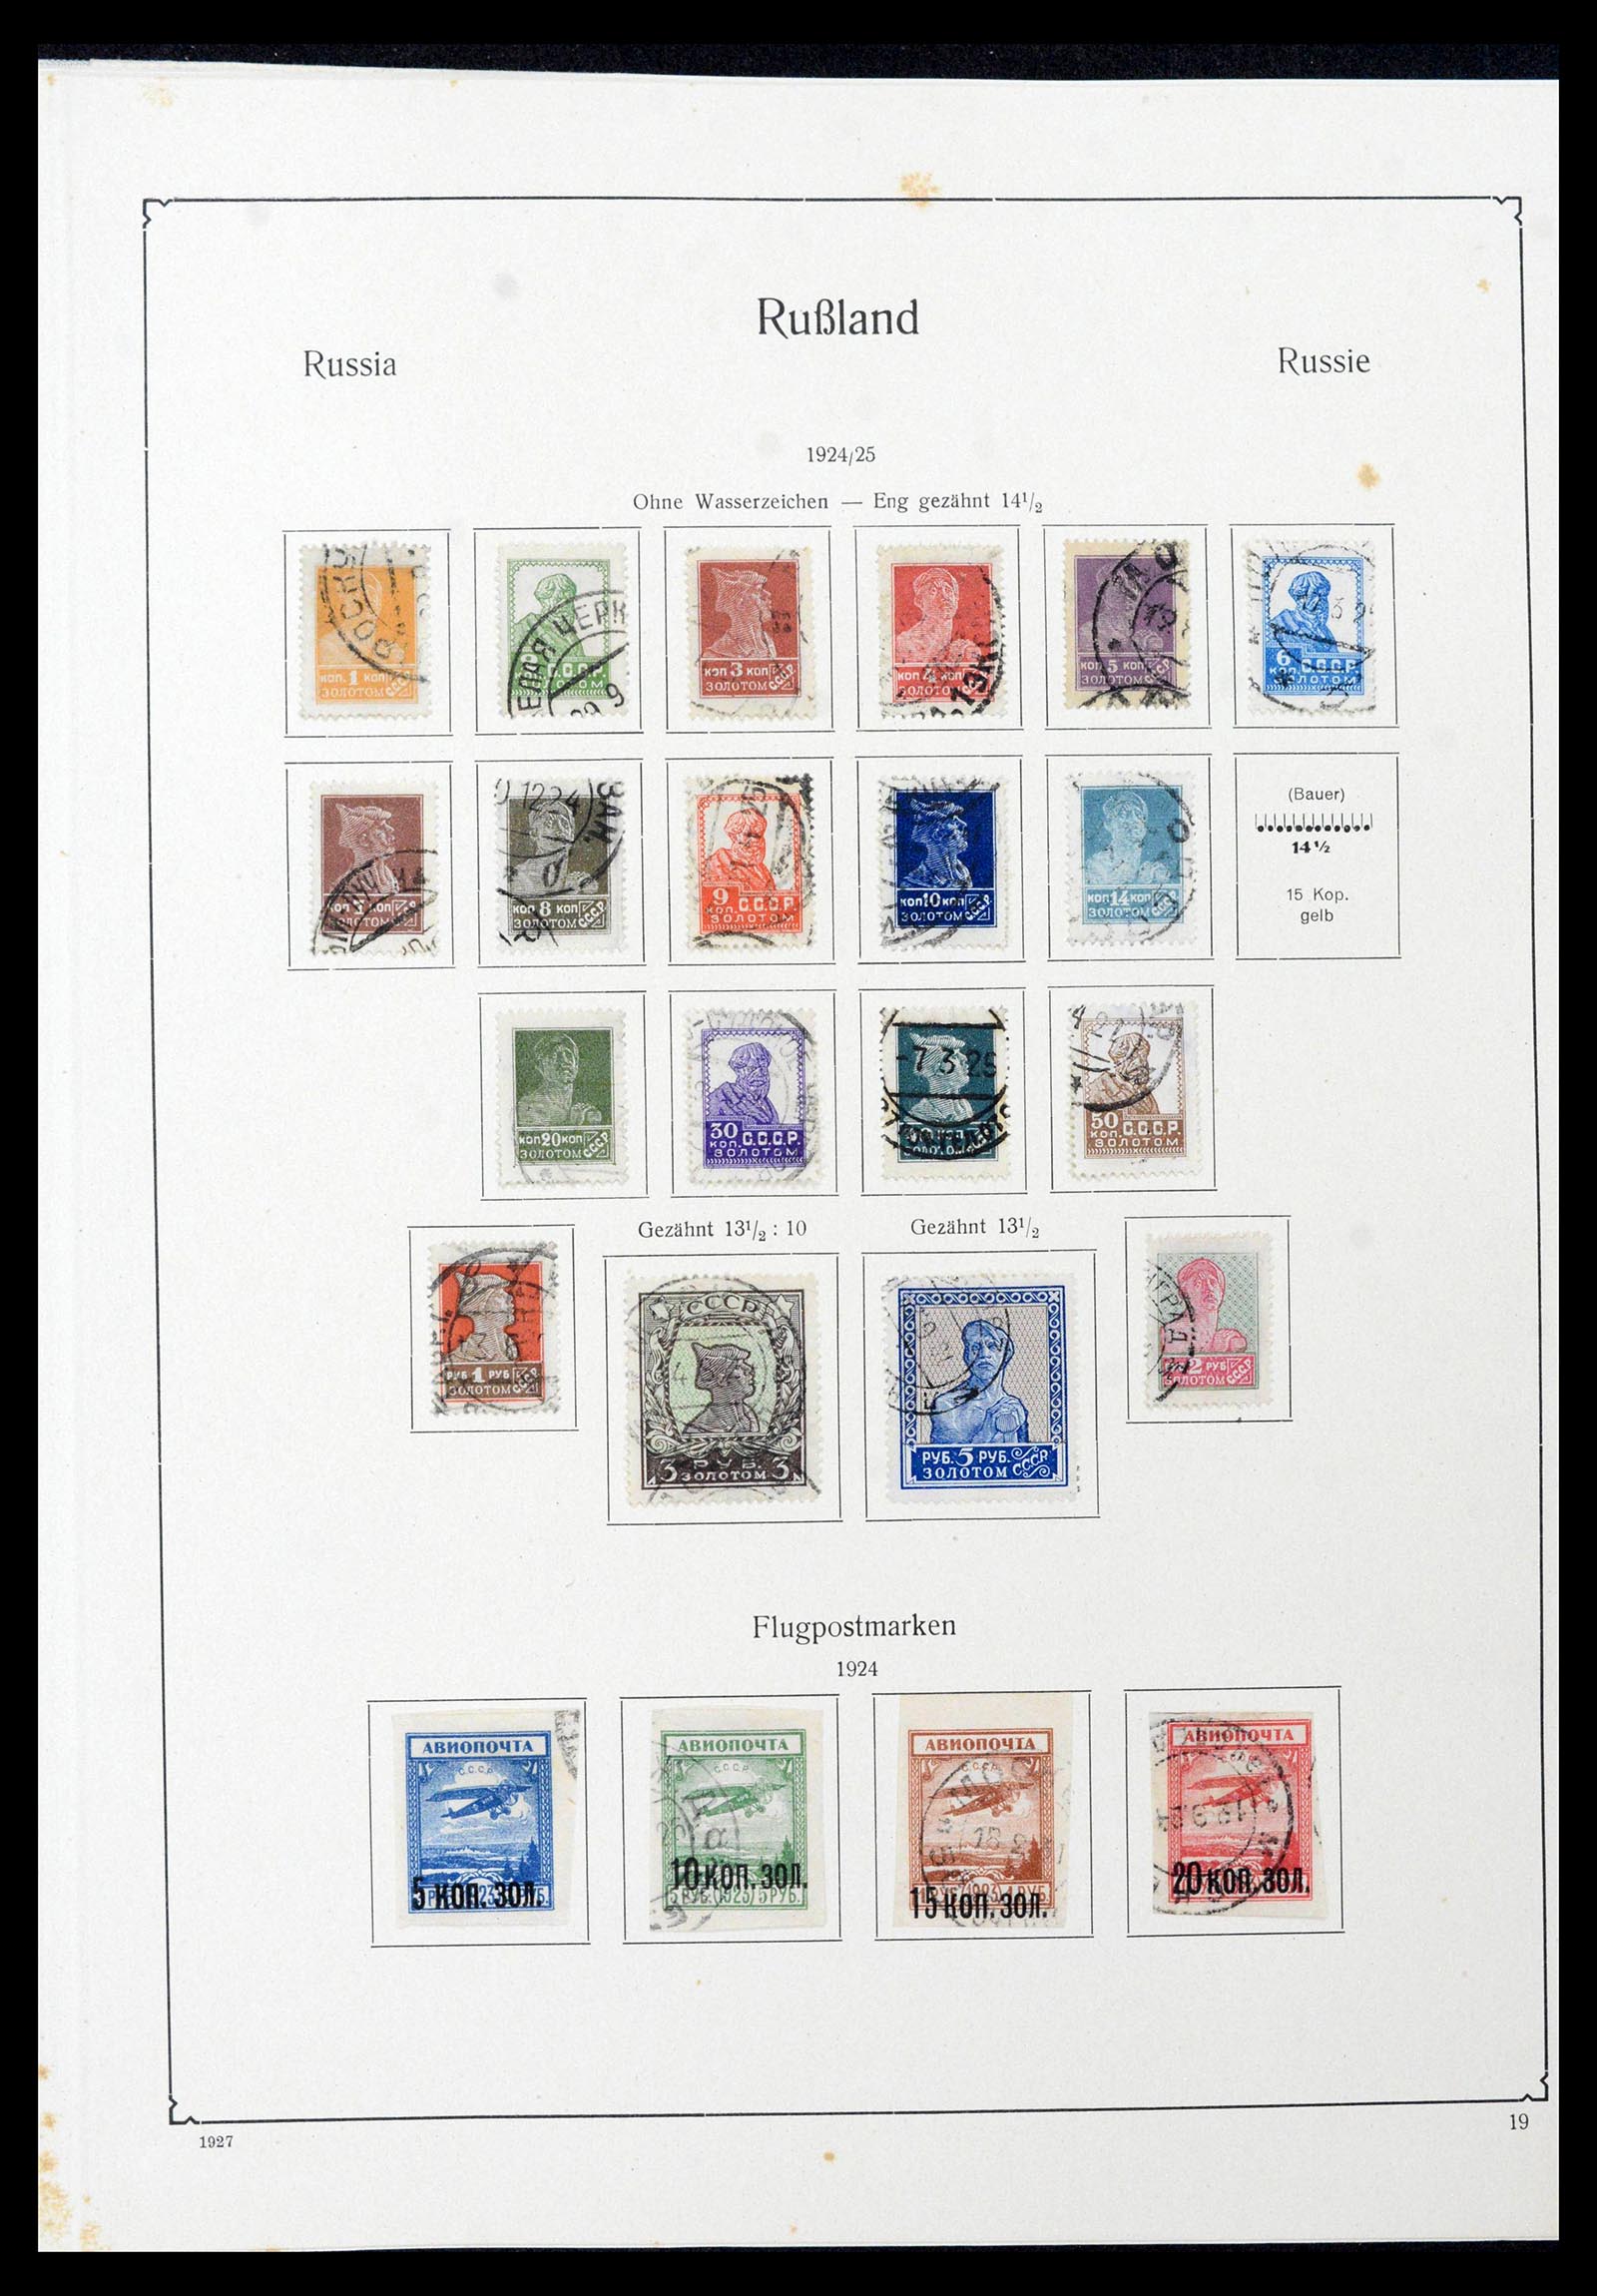 39086 0017 - Stamp collection 39086 Russia and territories 1858-1930.